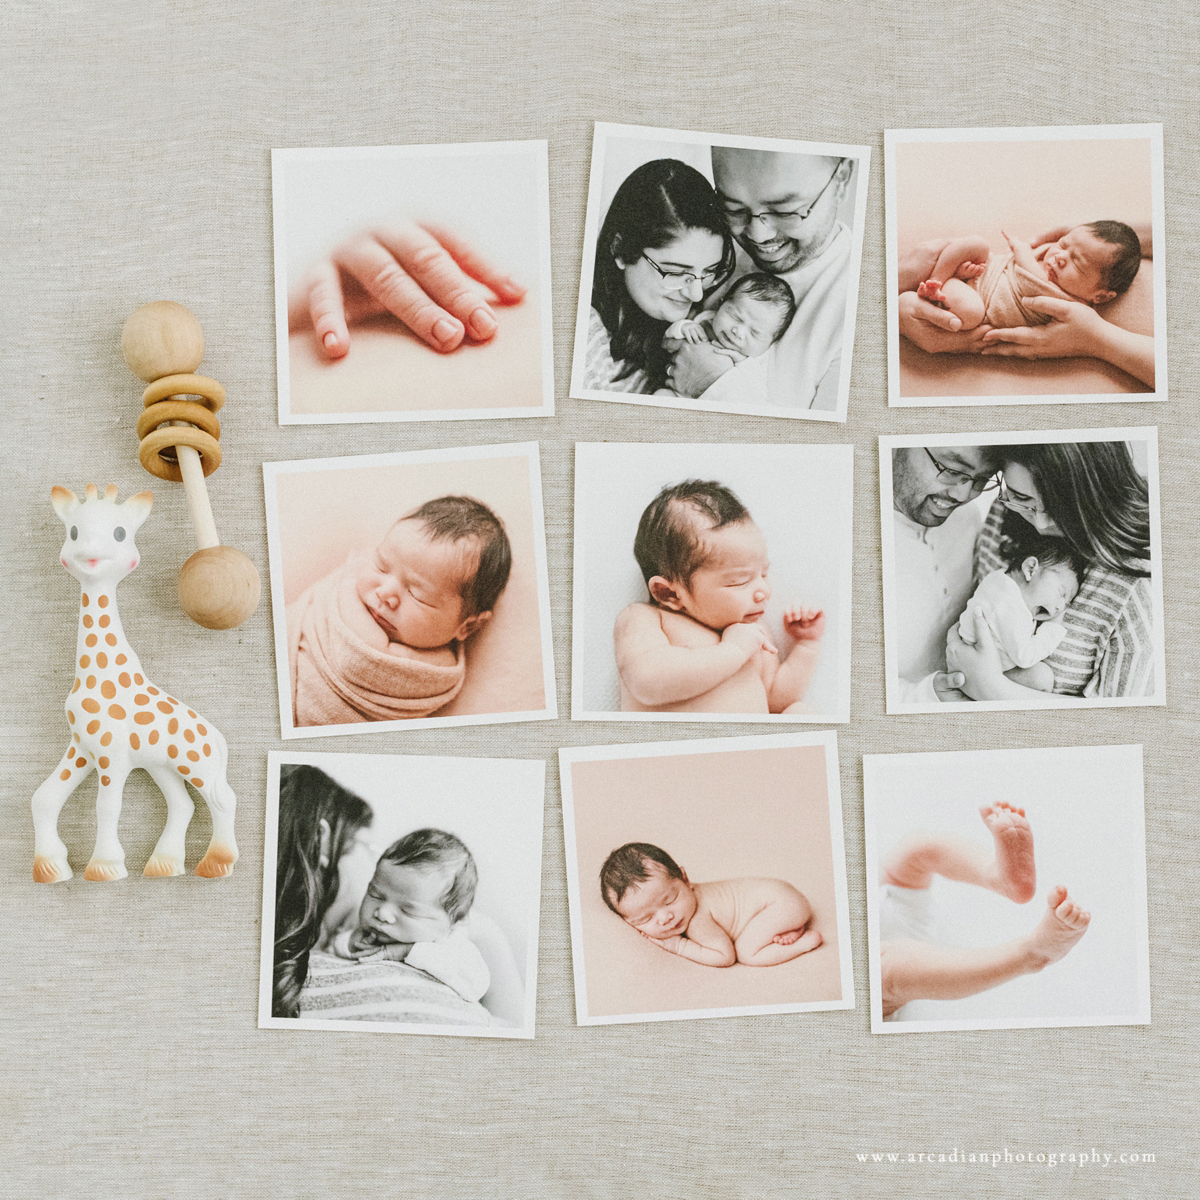 Learn more about booking newborn photos.